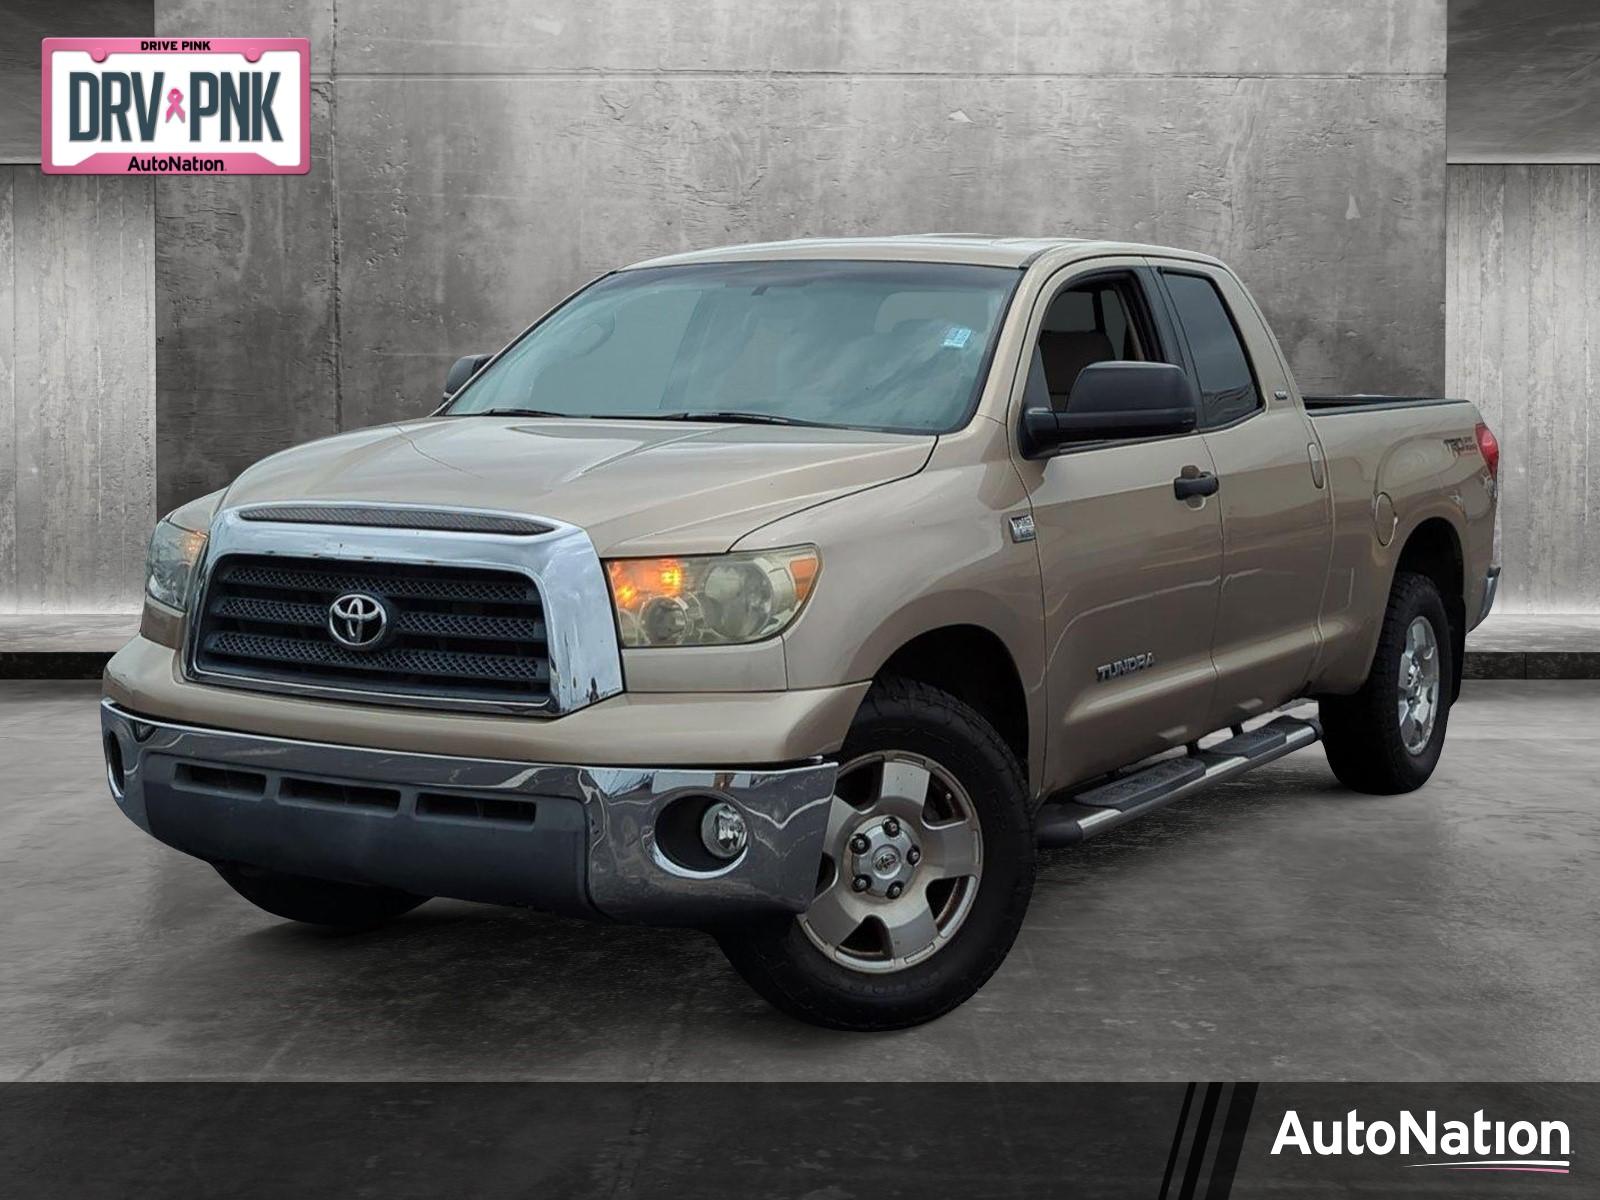 2007 Toyota Tundra Vehicle Photo in CLEARWATER, FL 33764-7163